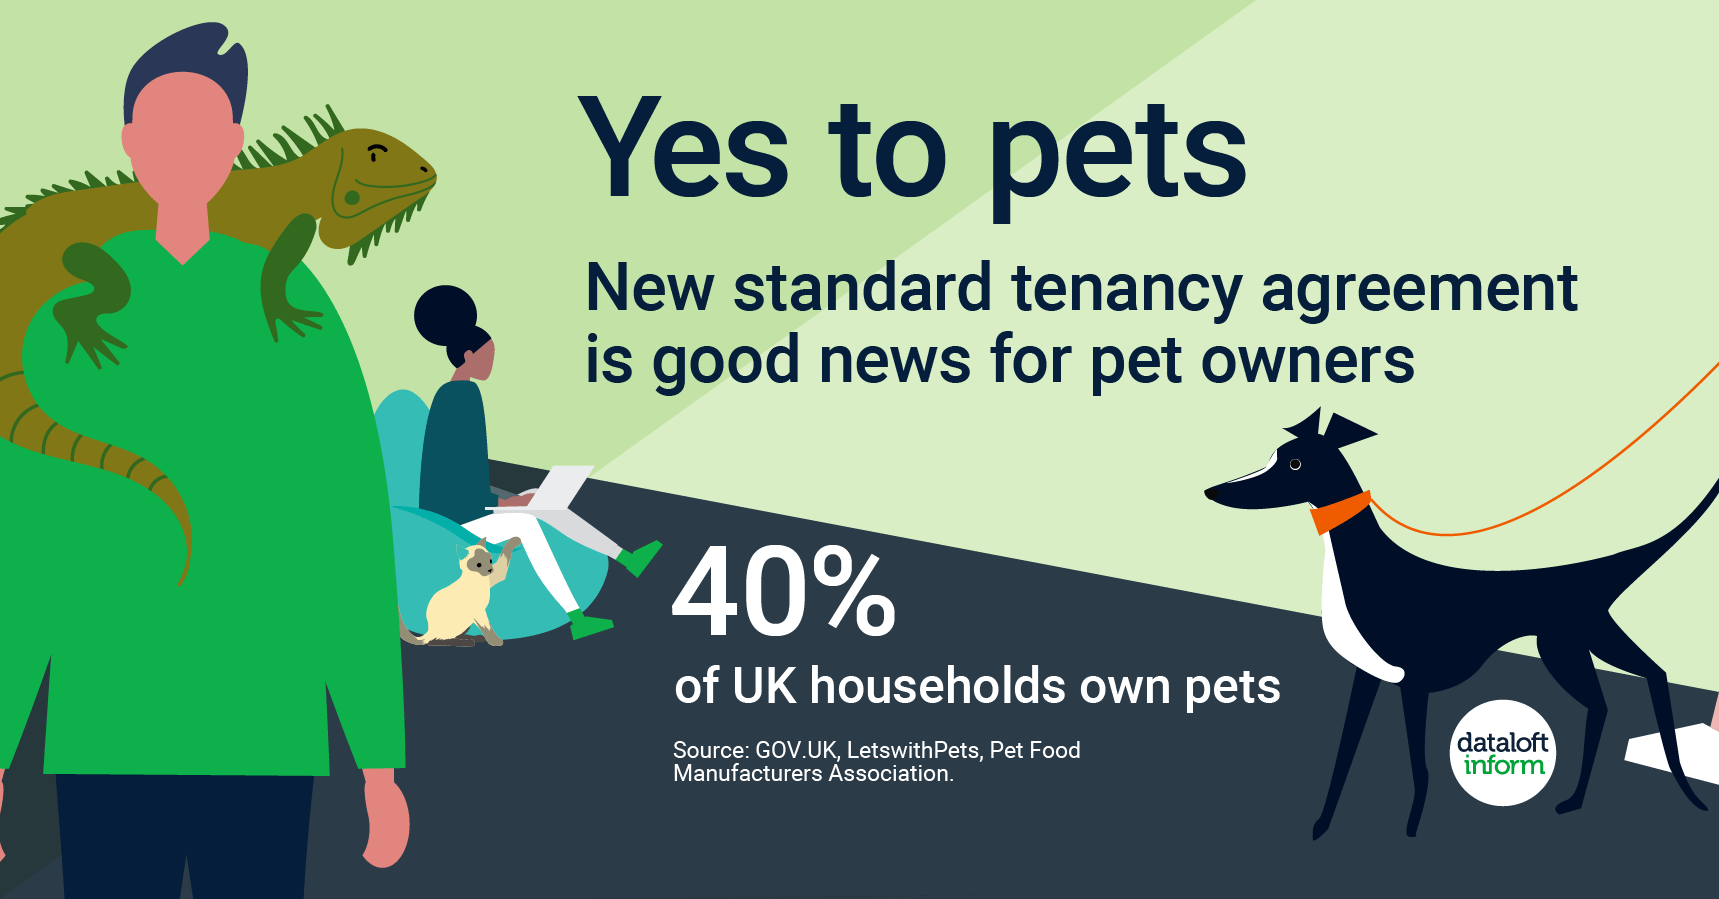 landlord infographic yes to pets tenancy agreement